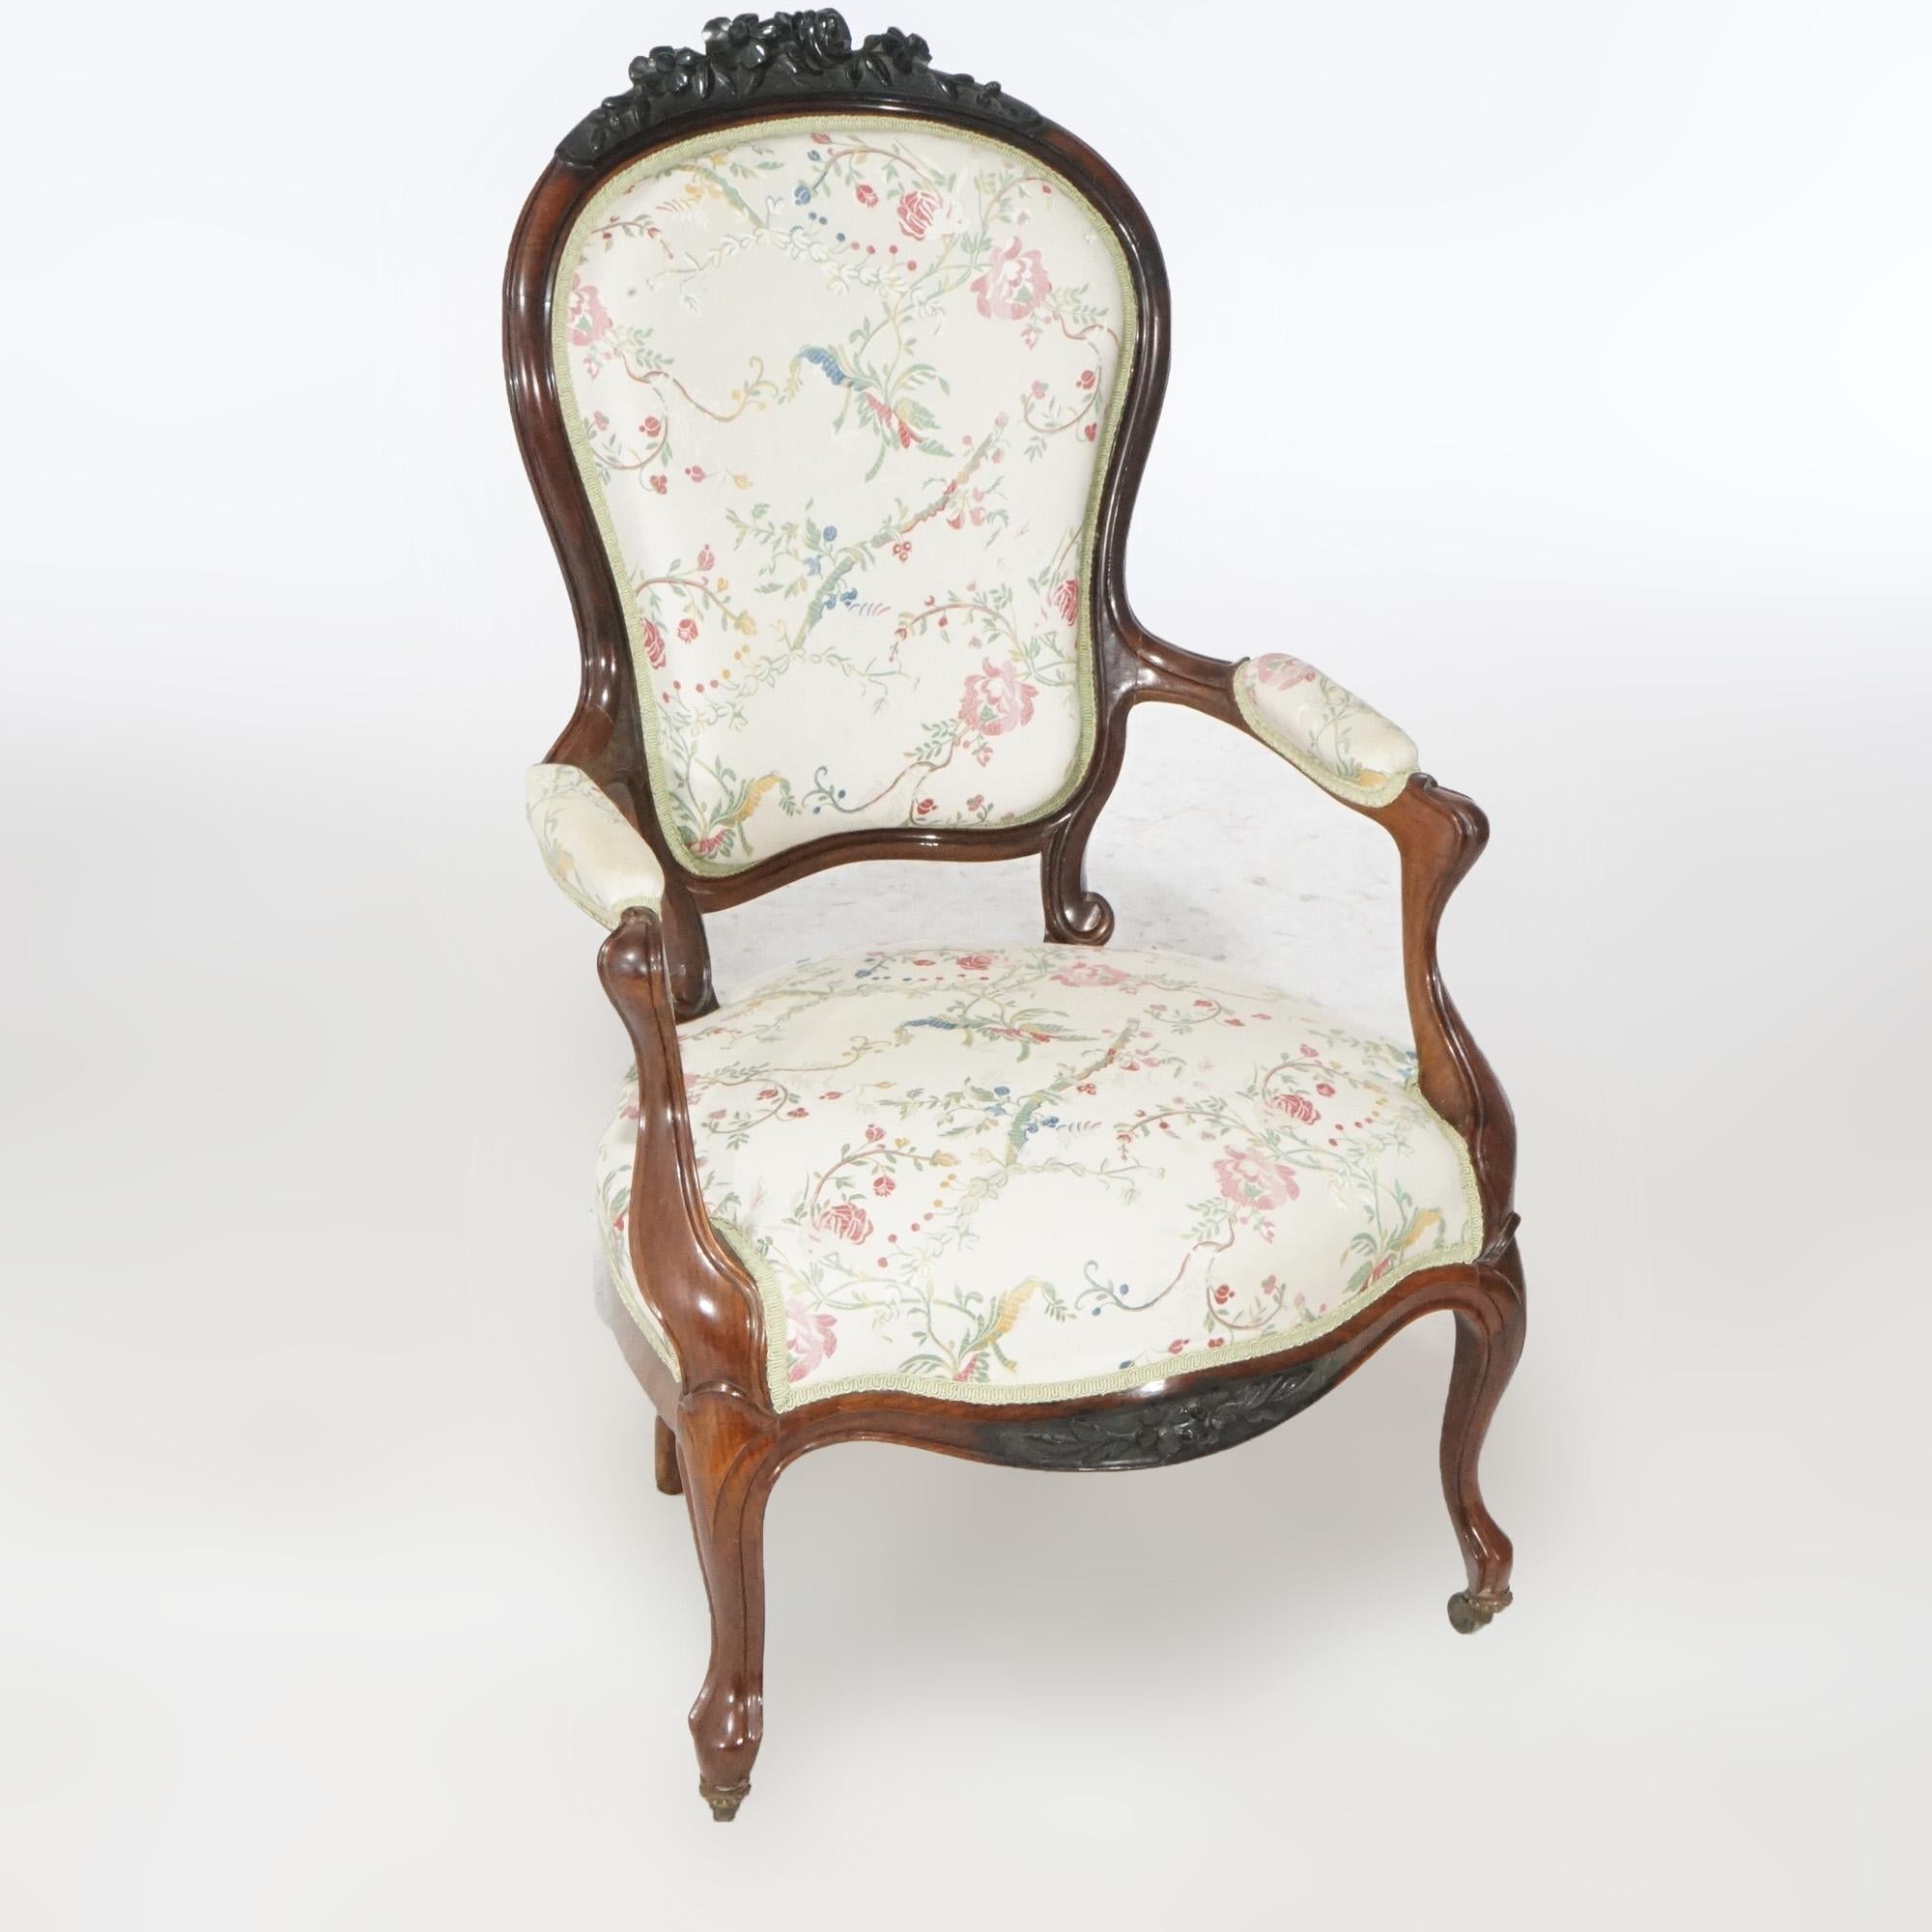 An antique pair of Victorian parlor armchairs offer rosewood construction with carved floral crest over upholstered seat, arms and backs, raised on cabriole legs, c1890.

Measures- 41.5''H x 25.25''W x 28''D.